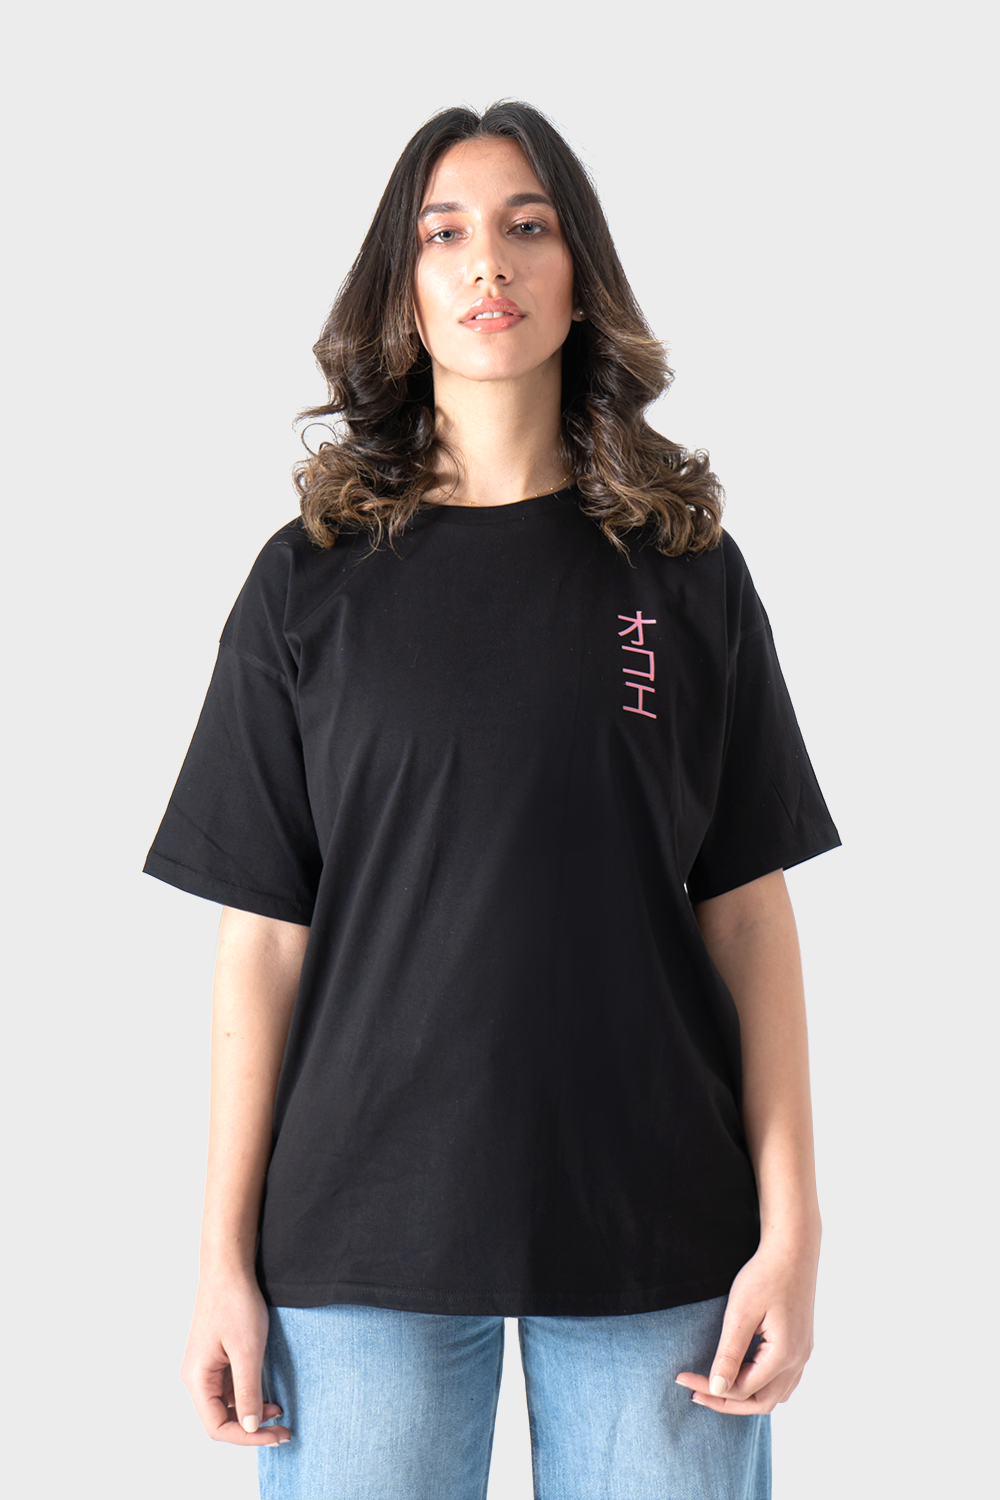 Black Animation Printed Over-Sized T-Shirt